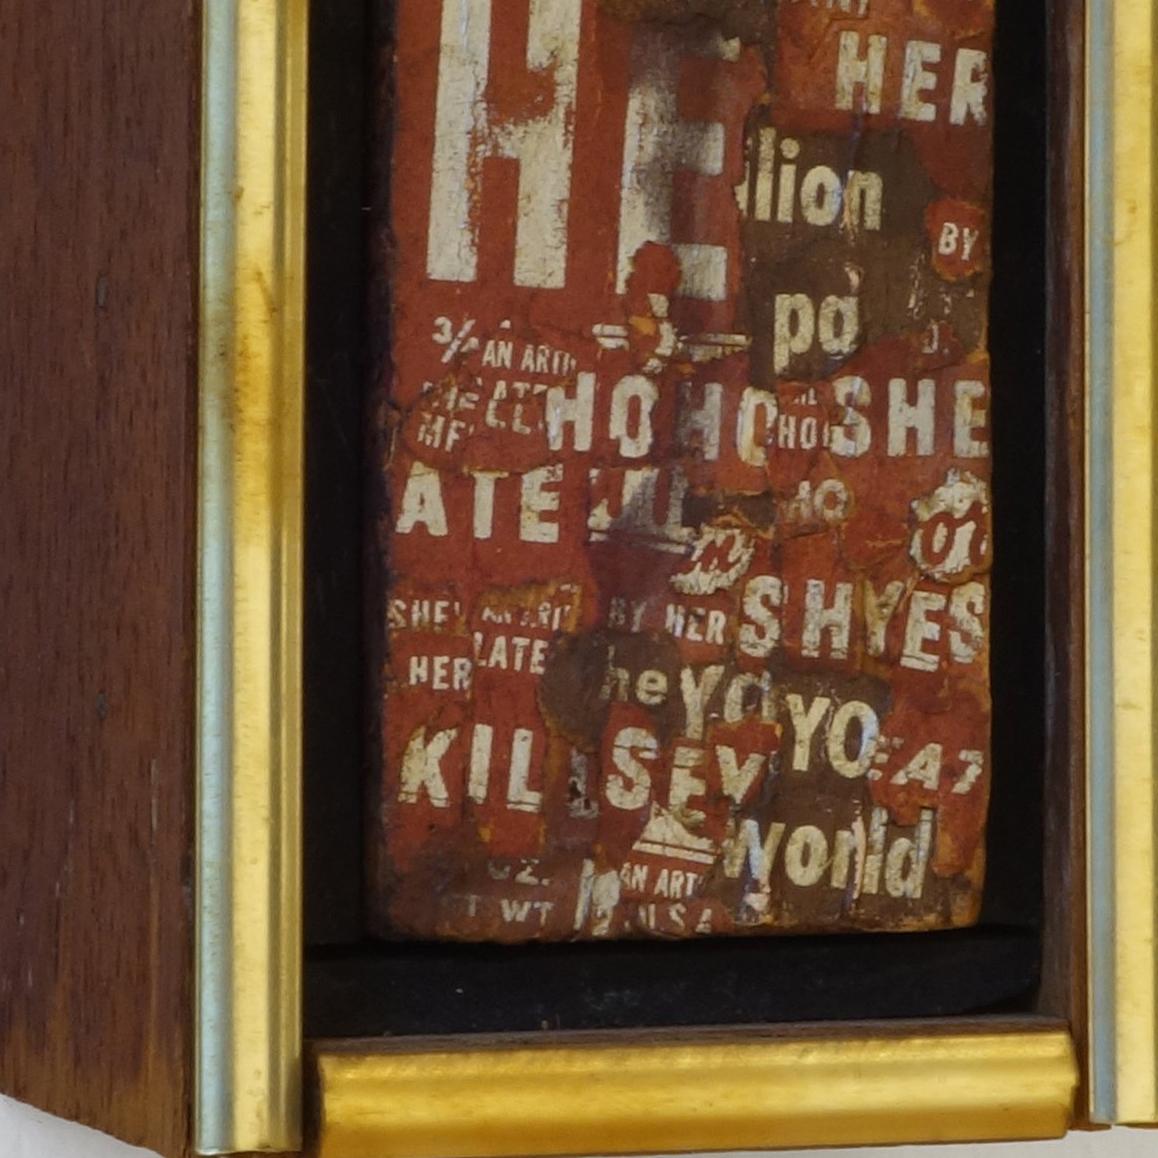 Hershey wrappers on wood with original artist frame. Hansen created collages and found object assemblages made from burnt matches, cigarette papers and text ripped from Hershey Bar wrappers.